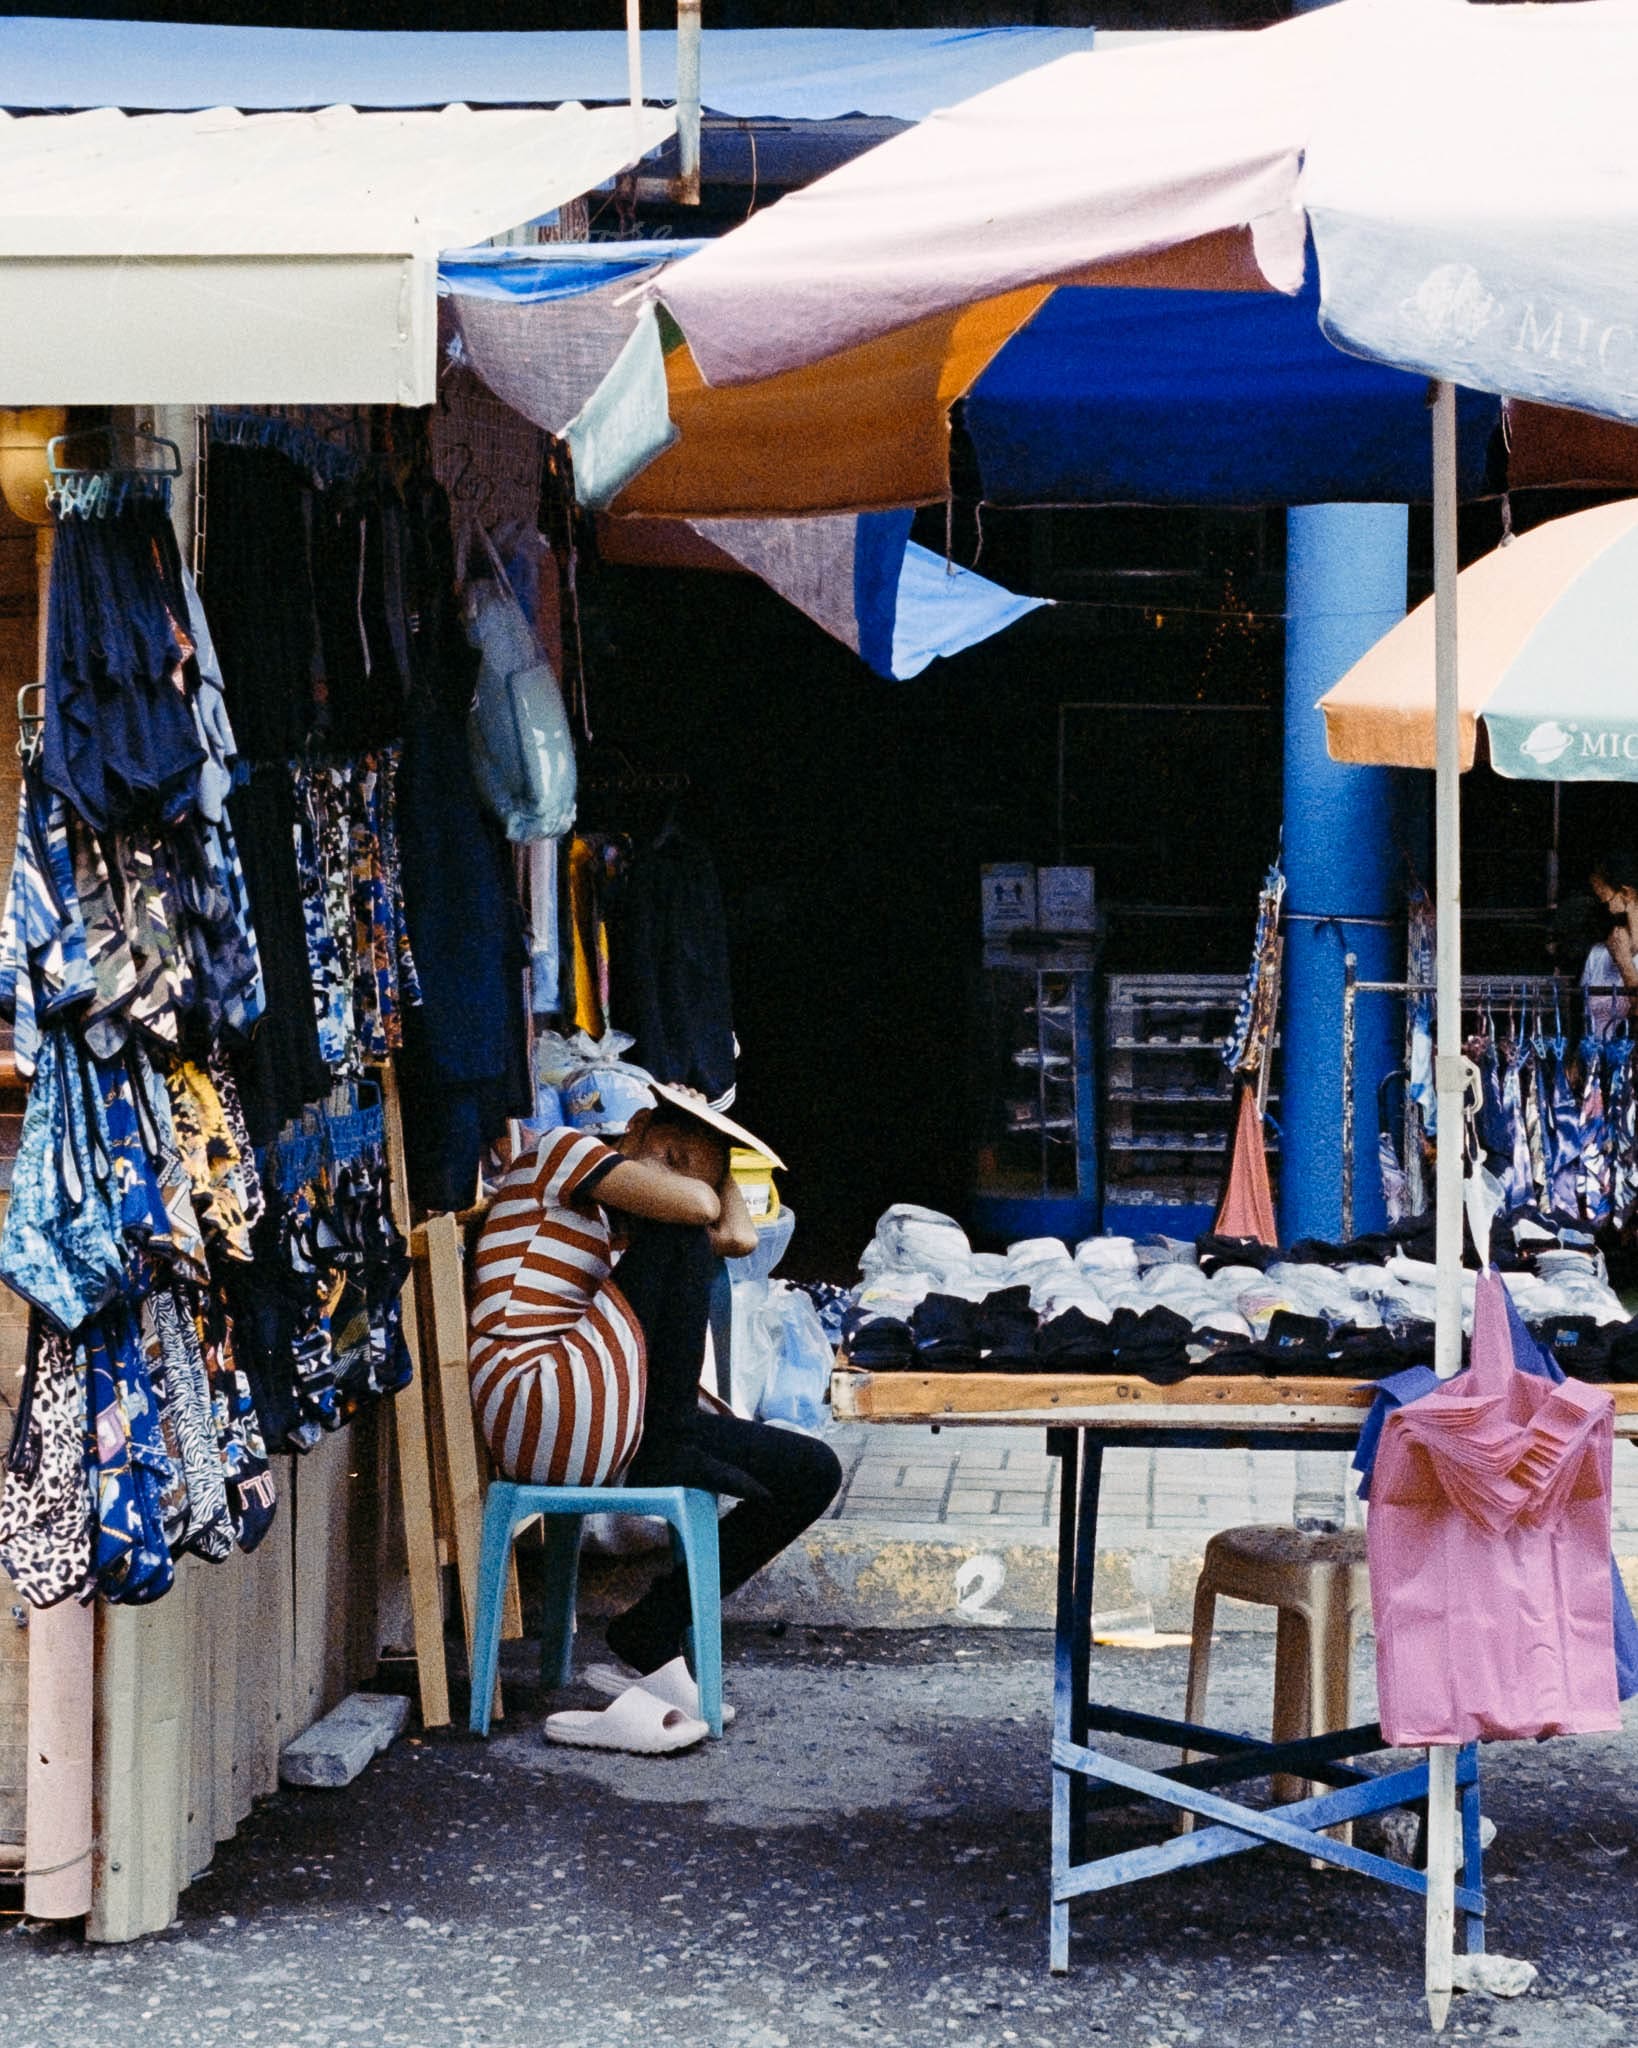 Vibrant clothing stalls at open-air market with solitary figure examining merchandise.